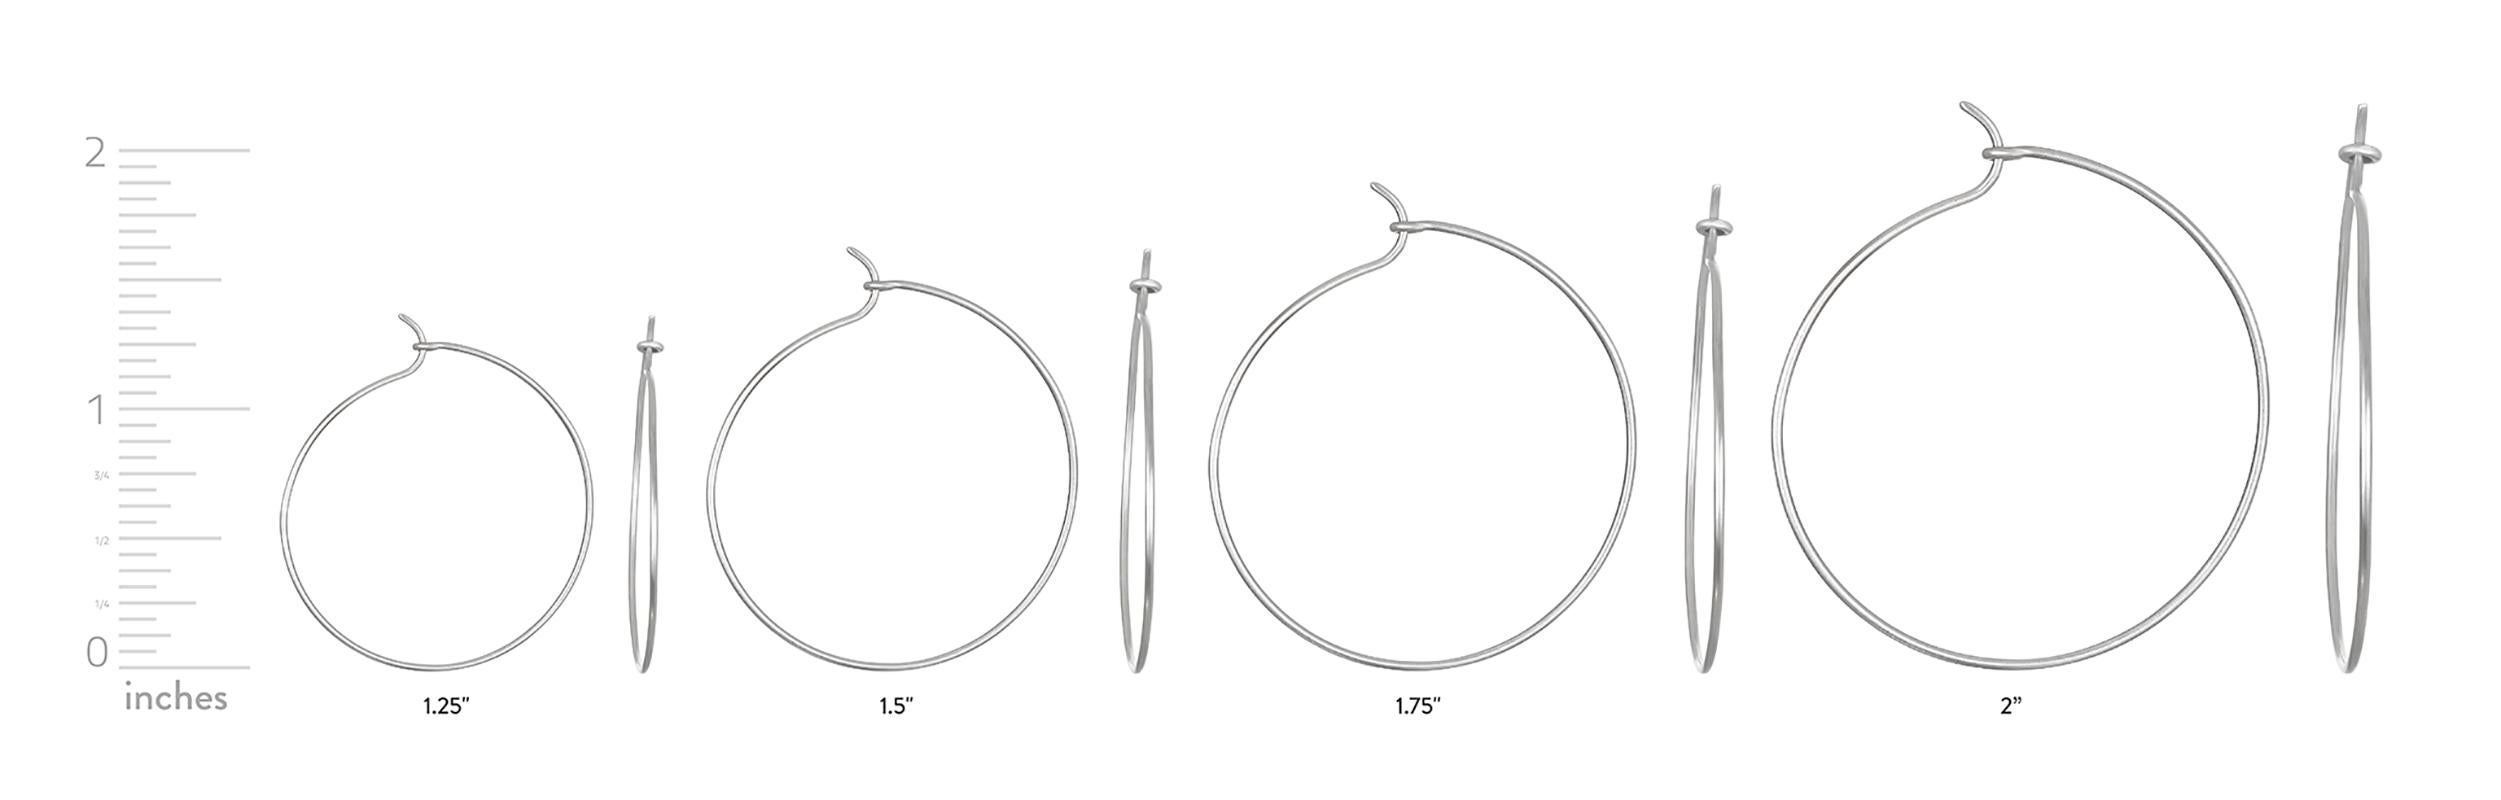 Faye Kim's Signature Platinum handmade wire hoops are a must-have for every jewelry wardrobe. Casual, chic and wearable every day, the hoops give endless opportunities to change your look with different drops, sold separately.

Hoops 2